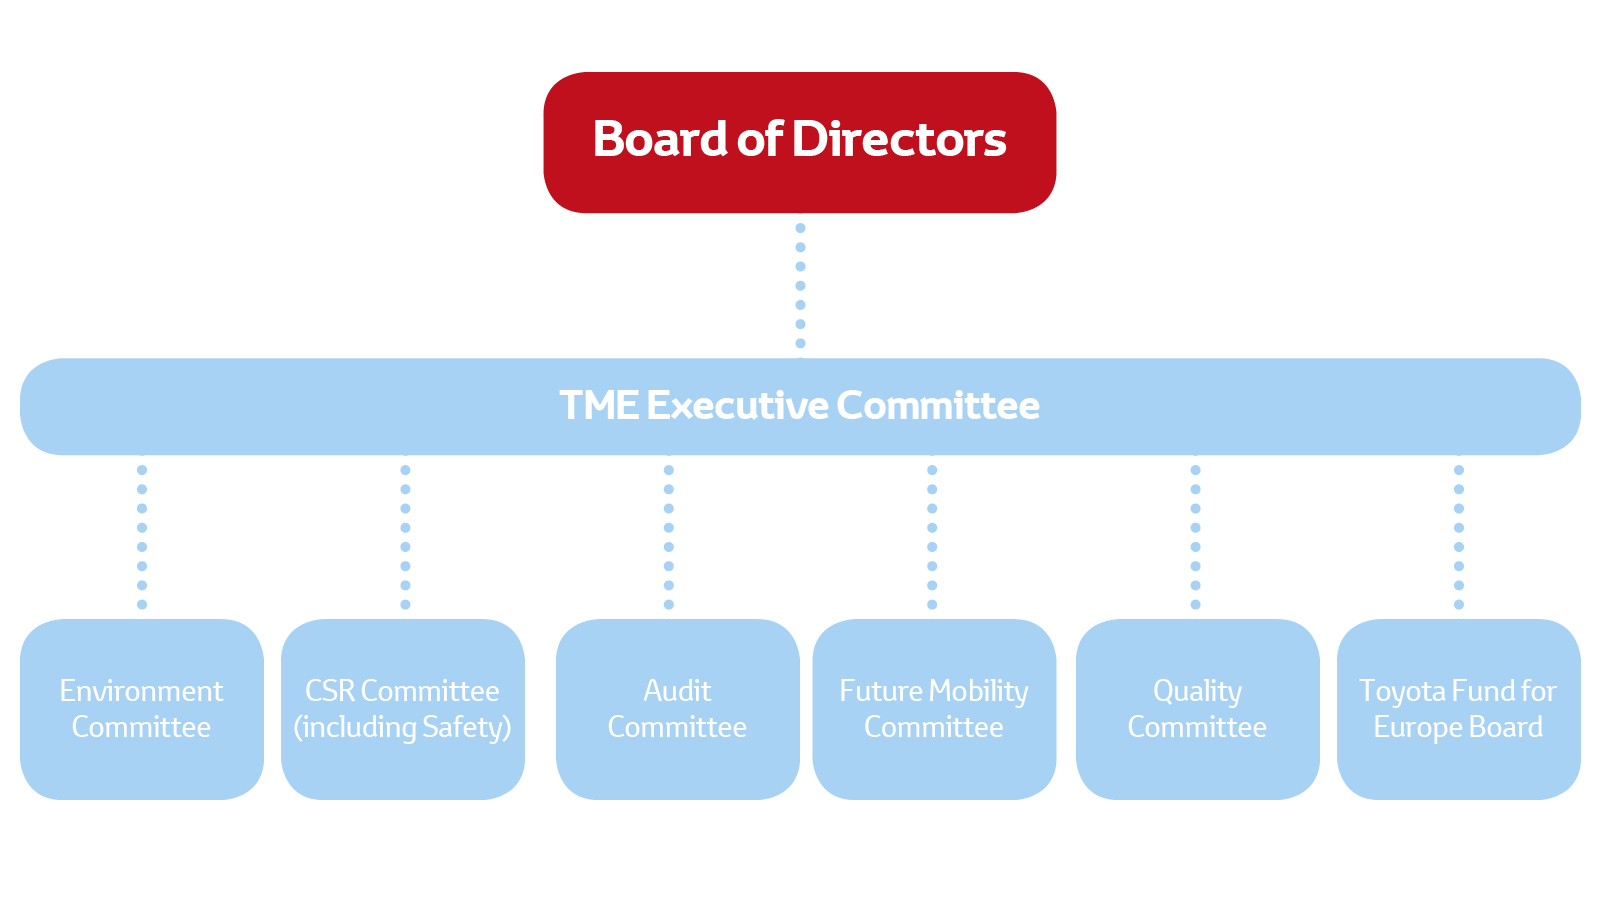 Our governance structure